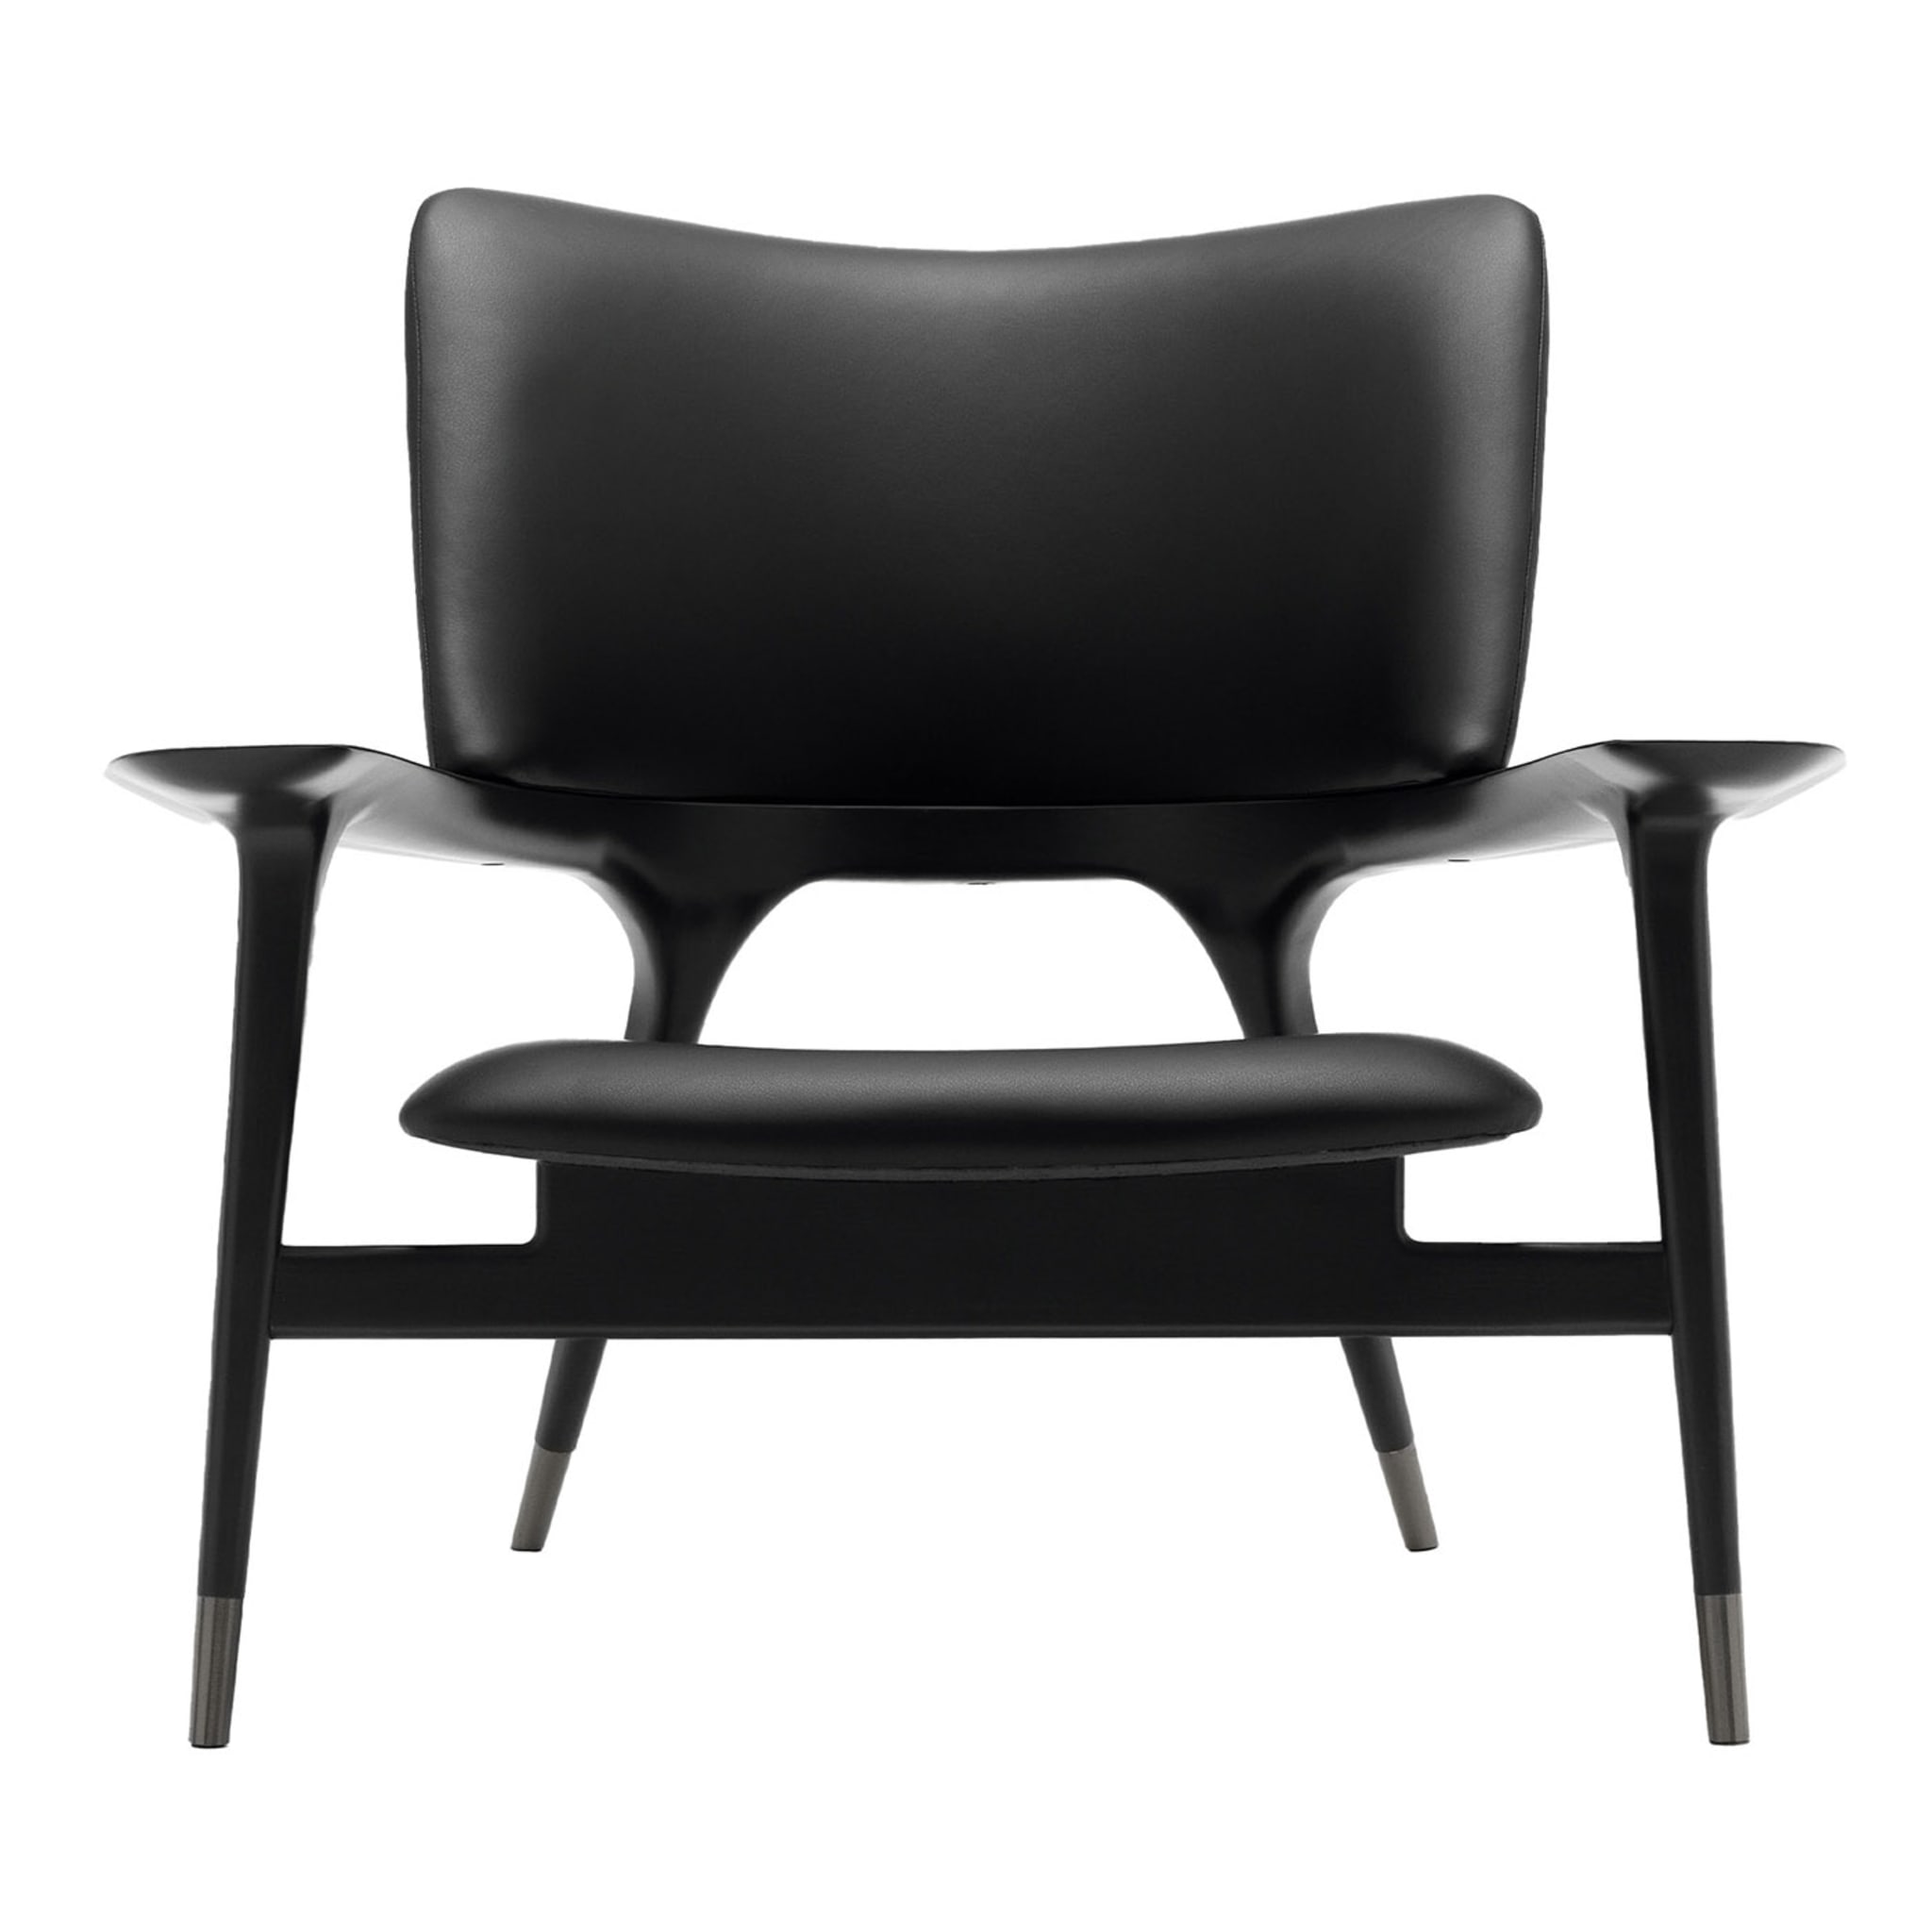 Mirage Black Wood & Leather Armchair - Main view